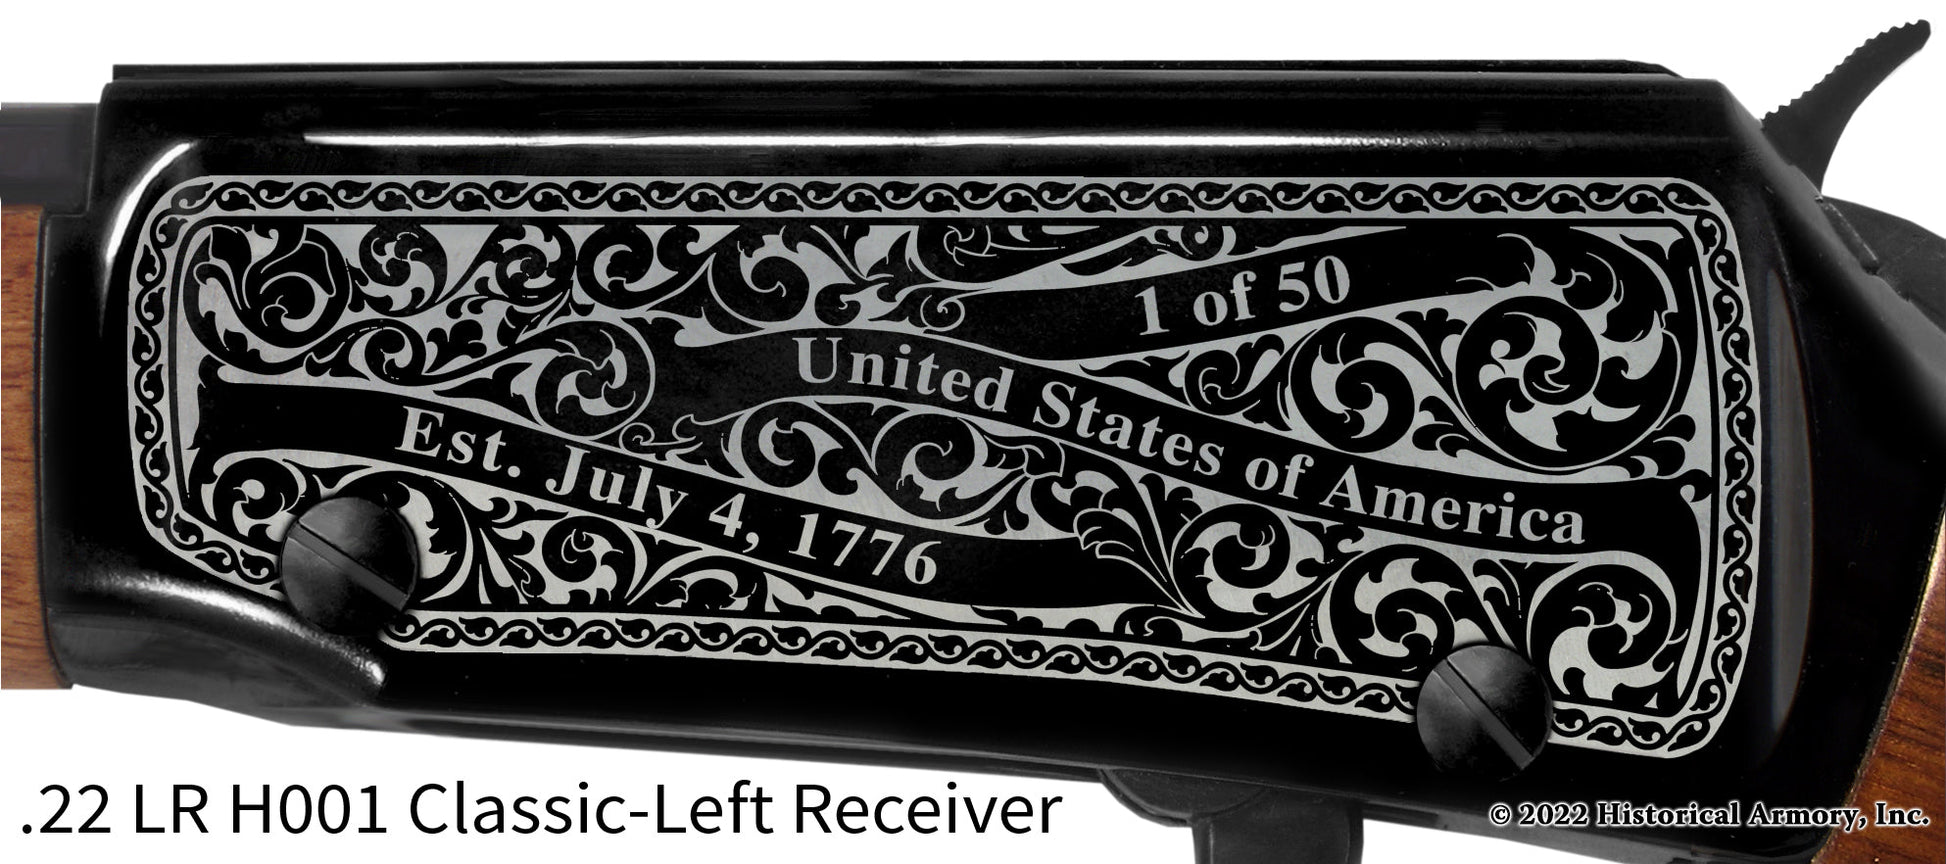 Franklin County Missouri Engraved Henry H001 Rifle